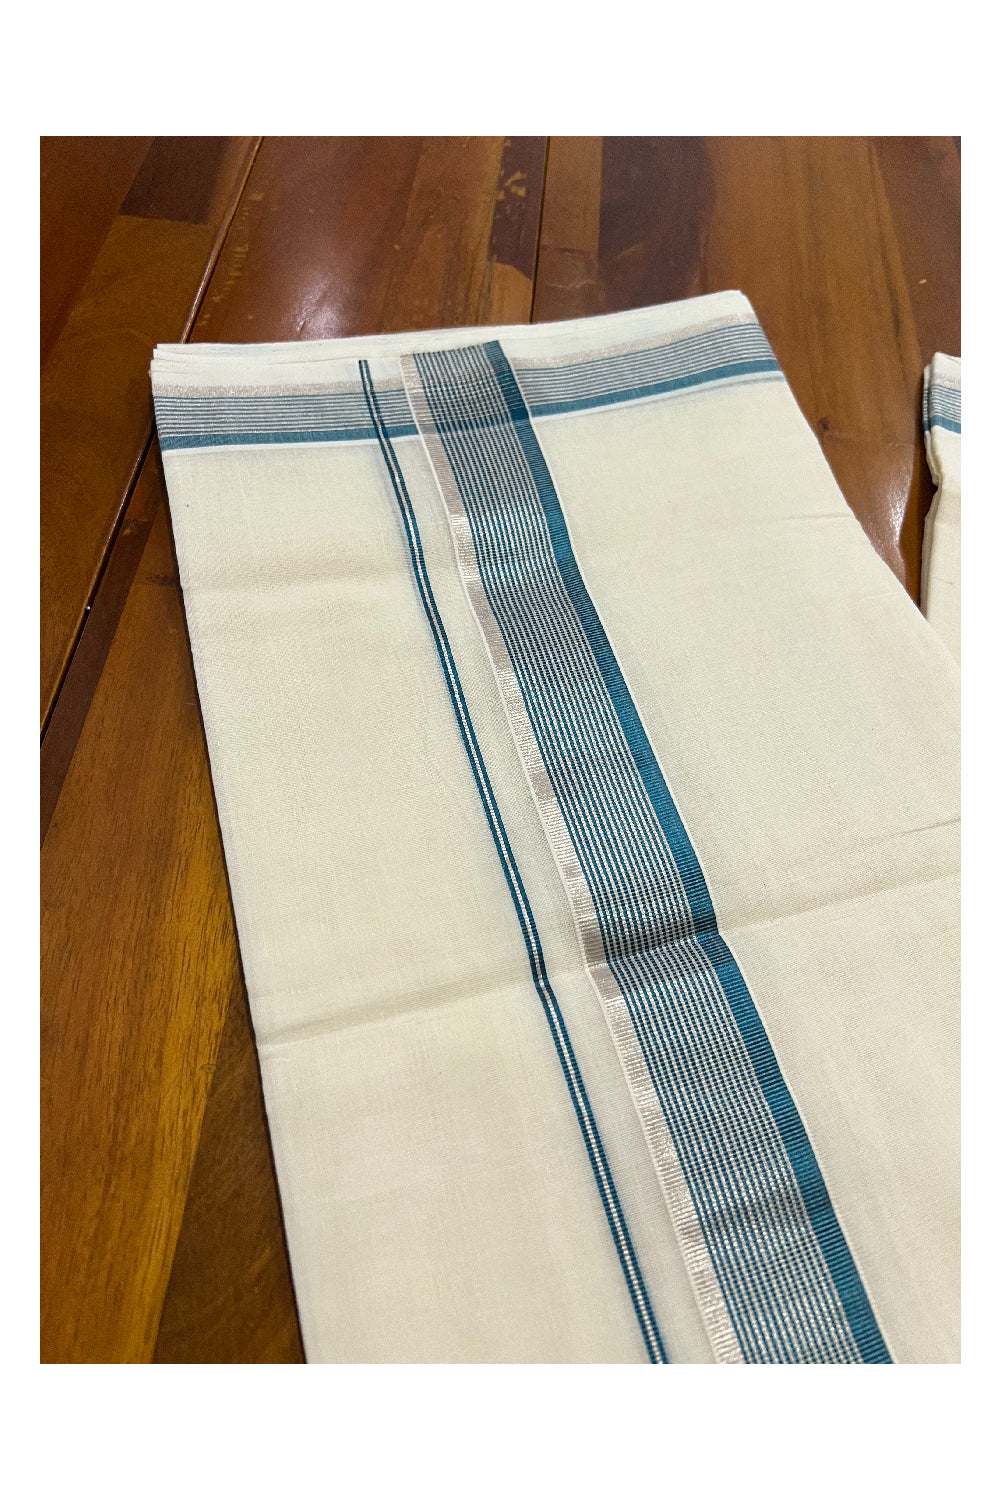 Southloom Kuthampully Handloom Pure Cotton Mundu with Silver and Teal Blue Kasavu Border (South Indian Dhoti)